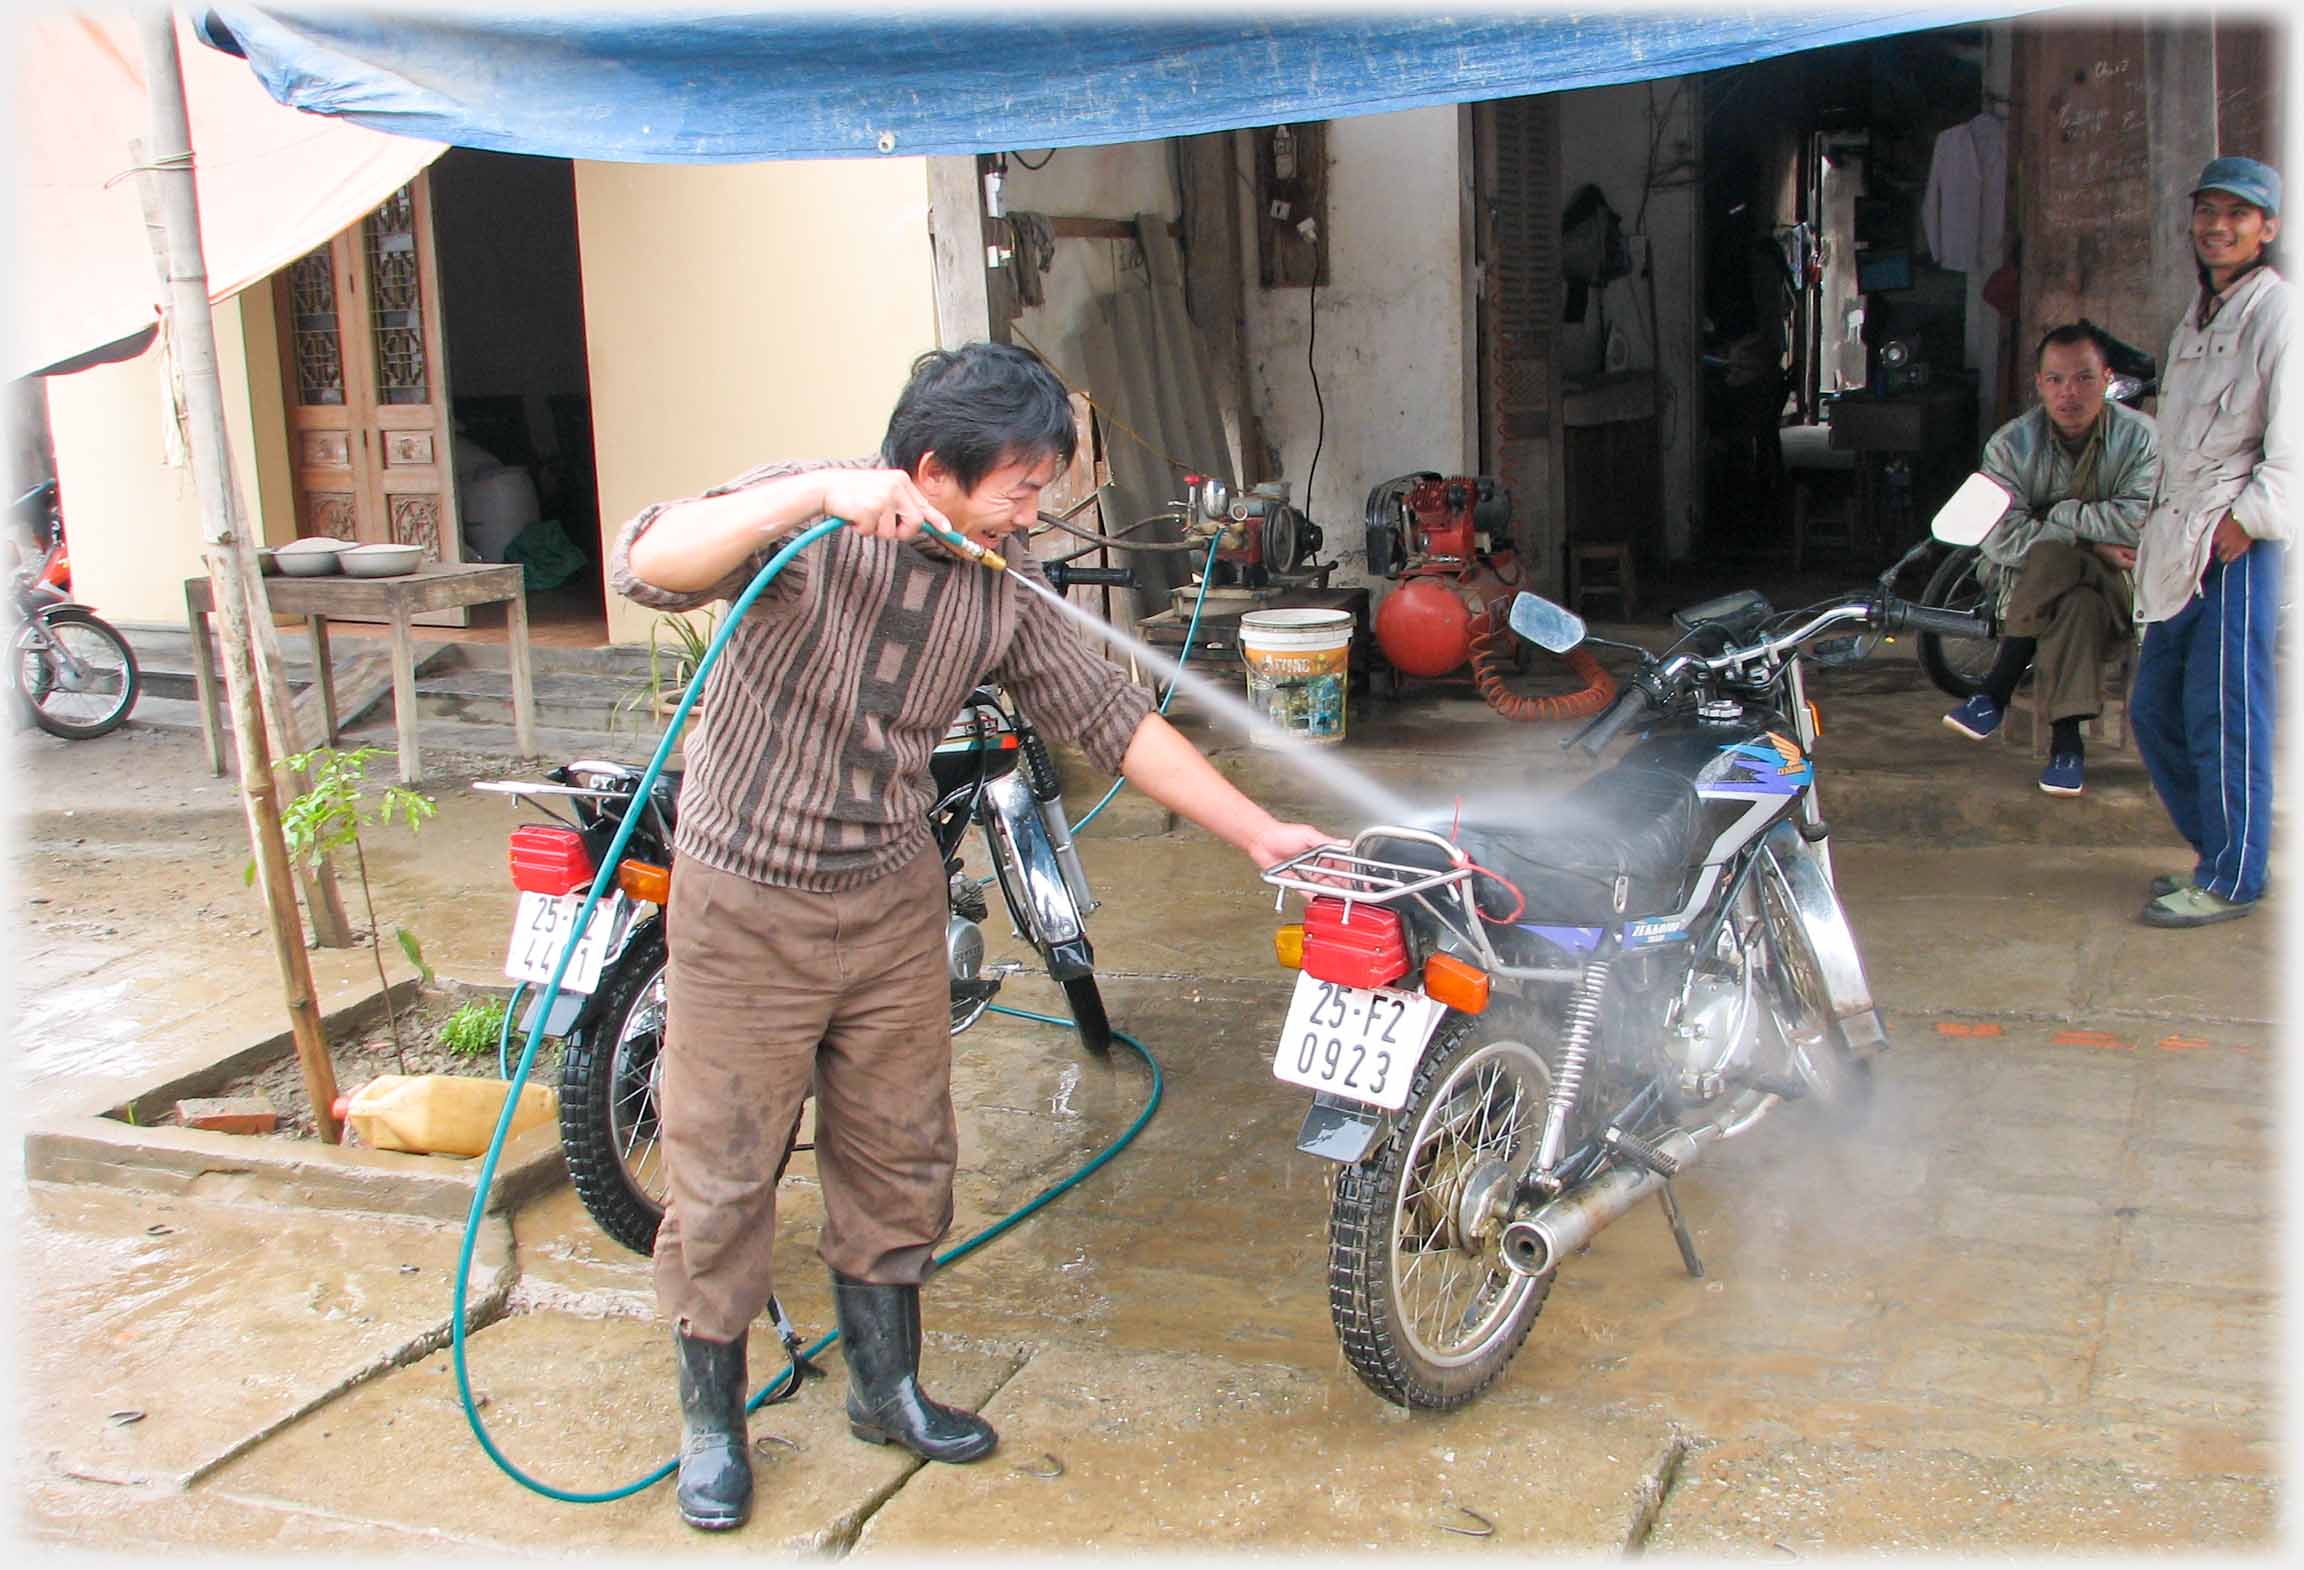 Man with power hose in gum-boots washing motorbike, two men watching.